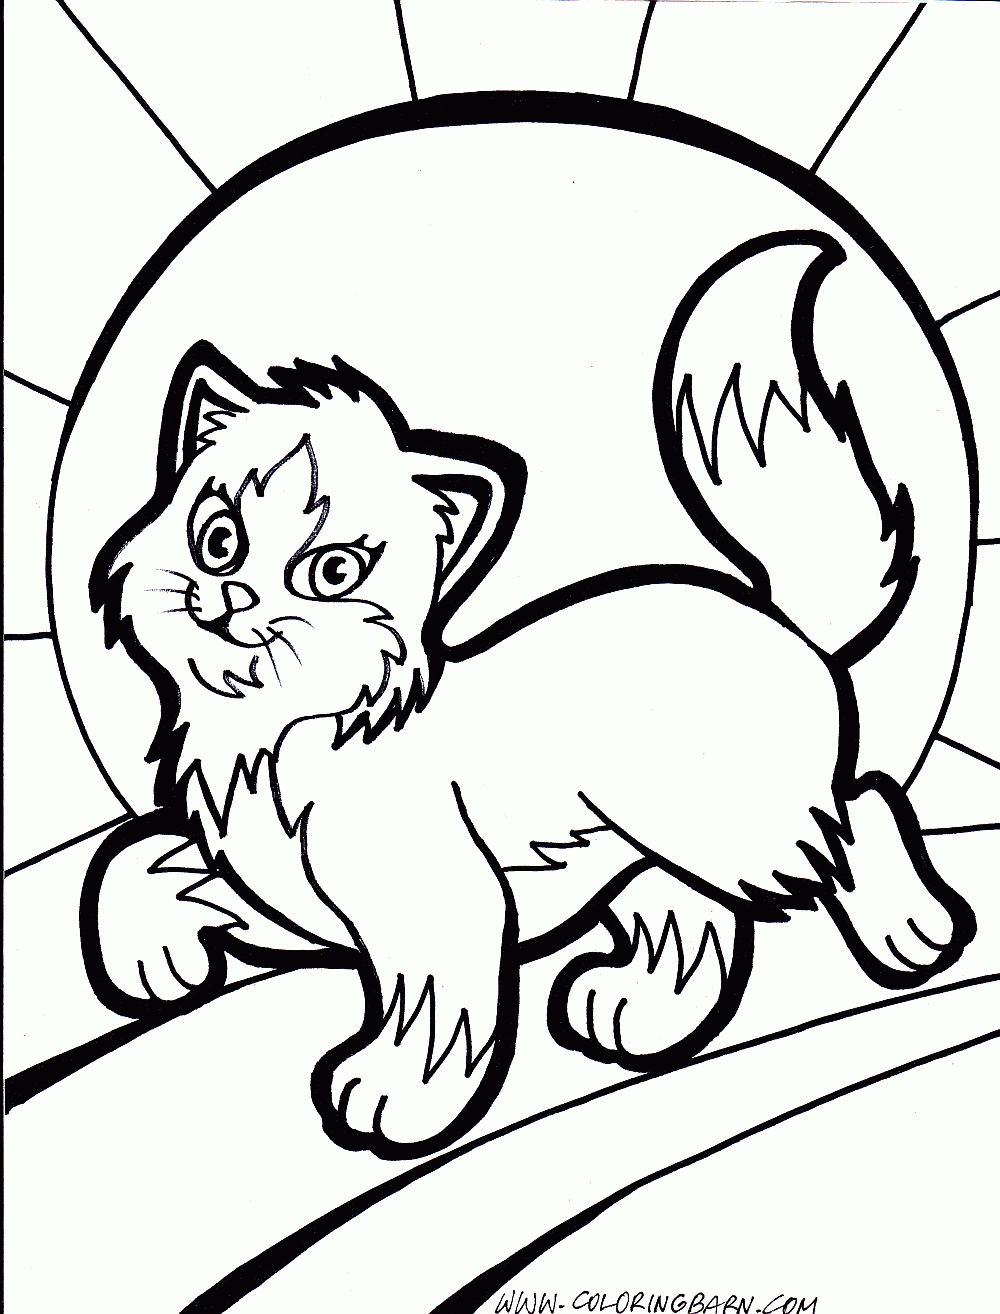 Download Coloring Page Printable Cat - 53+ SVG File for DIY Machine for Cricut, Silhouette and Other Machine